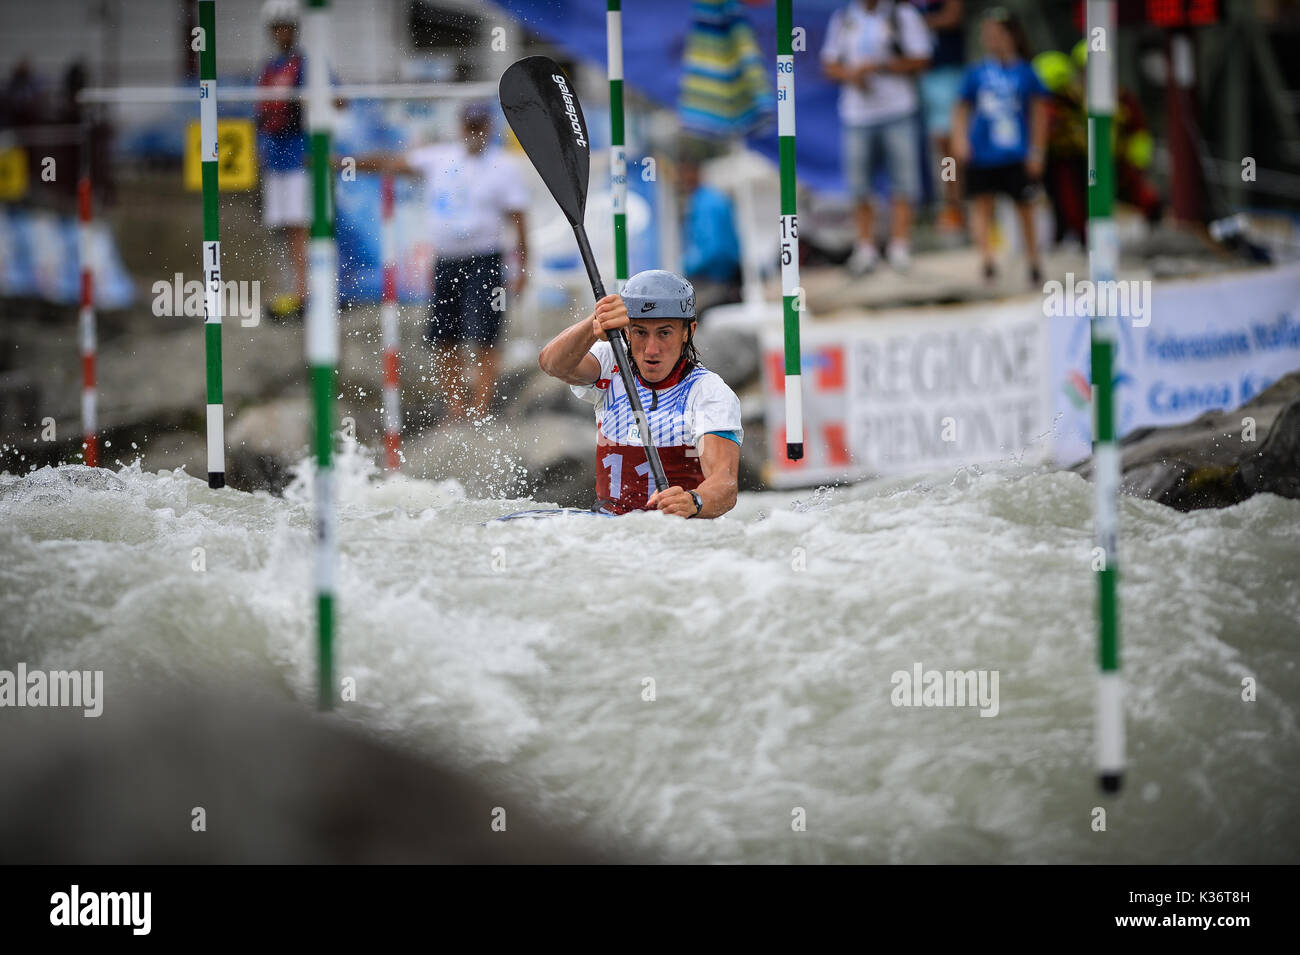 Ivrea, Torino, Italy. September, 2nd, 2017. Canoe Slalom World Cup stage IV, 240 athletes from 31 countries compete in the fourth stage of the 2017 ICF Canoe Slalom World Cup in the beautiful city of Ivrea, located in north west of Italy down the Alps, ones of the less to have a natural river water Canoe Stadium in the heart of the city.  Bin n. 11 SMOLEN Michal 2nd K1M. Damiano Benedetto/ Alamy Live News Stock Photo